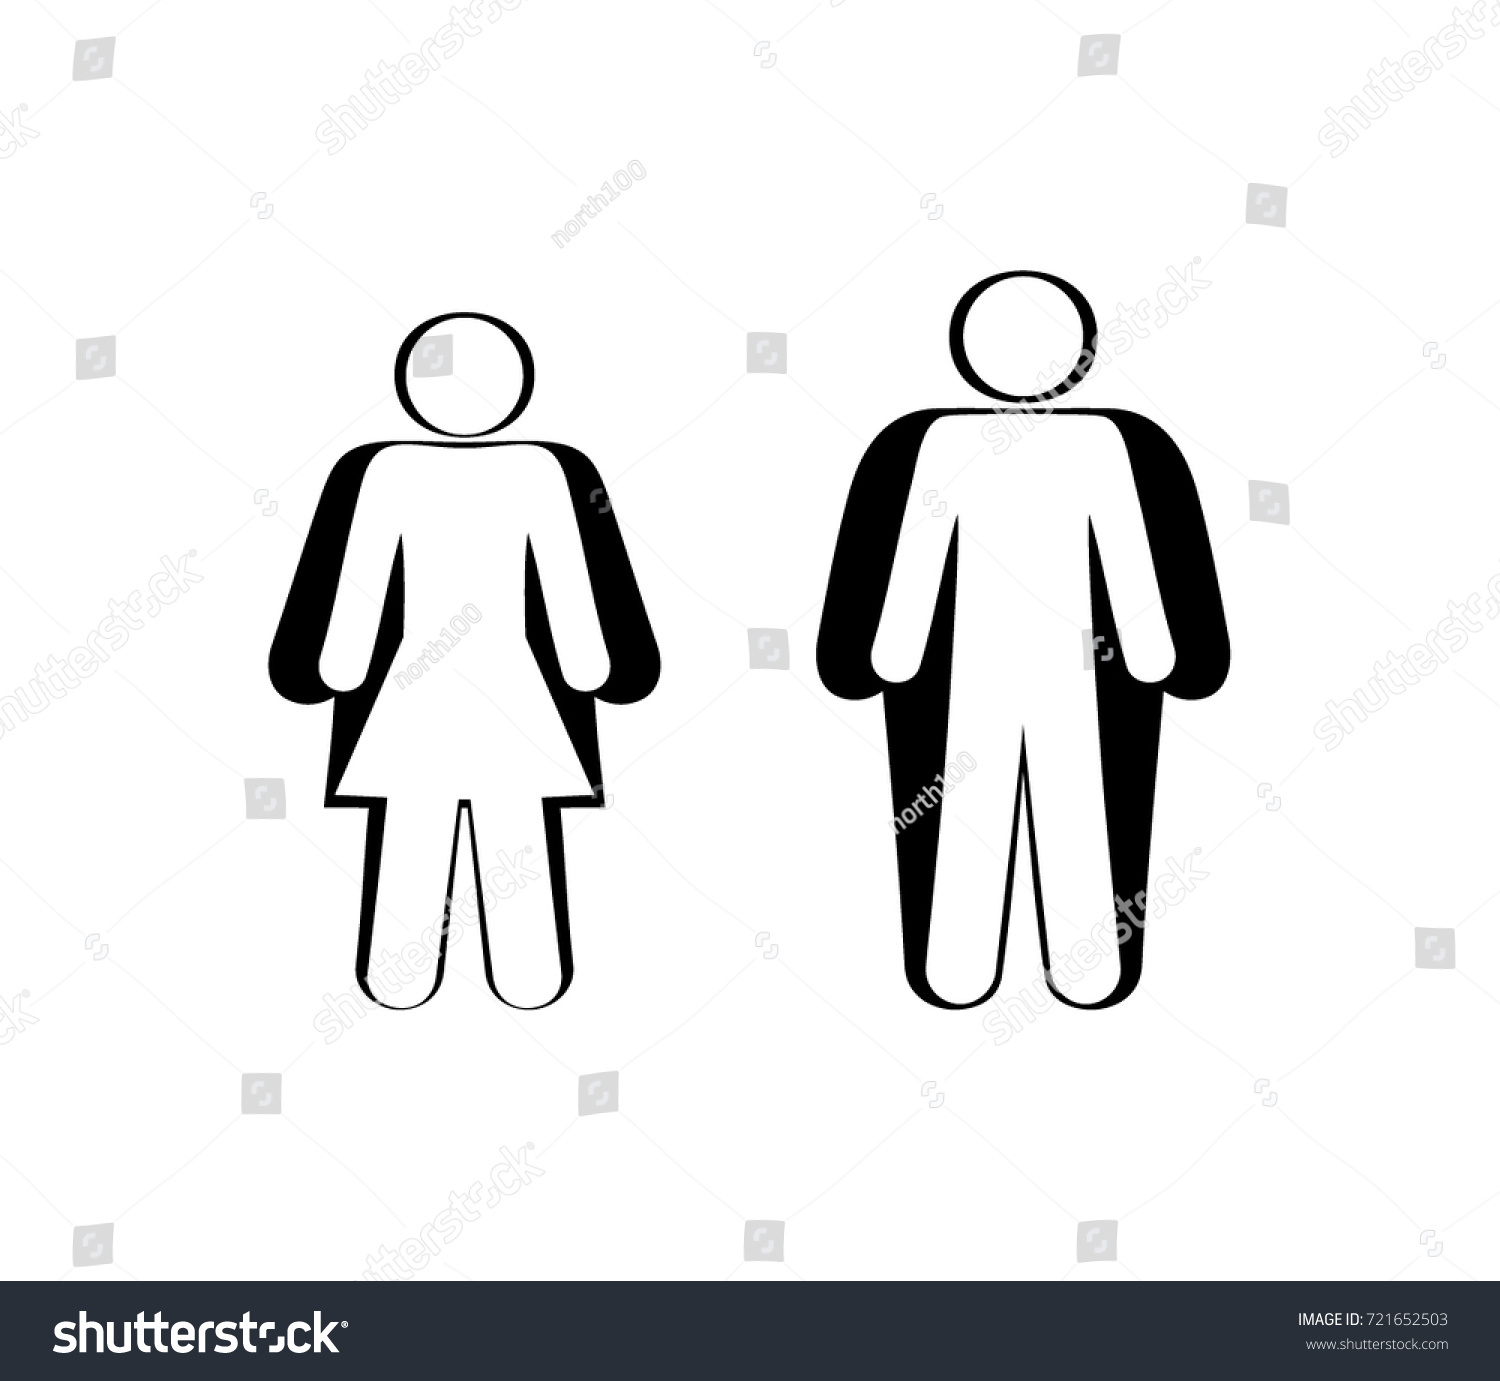 stock-vector-silhouettes-of-man-and-woman-stick-figure-slender-and-thick-overlapping-each-other-721652503.jpg